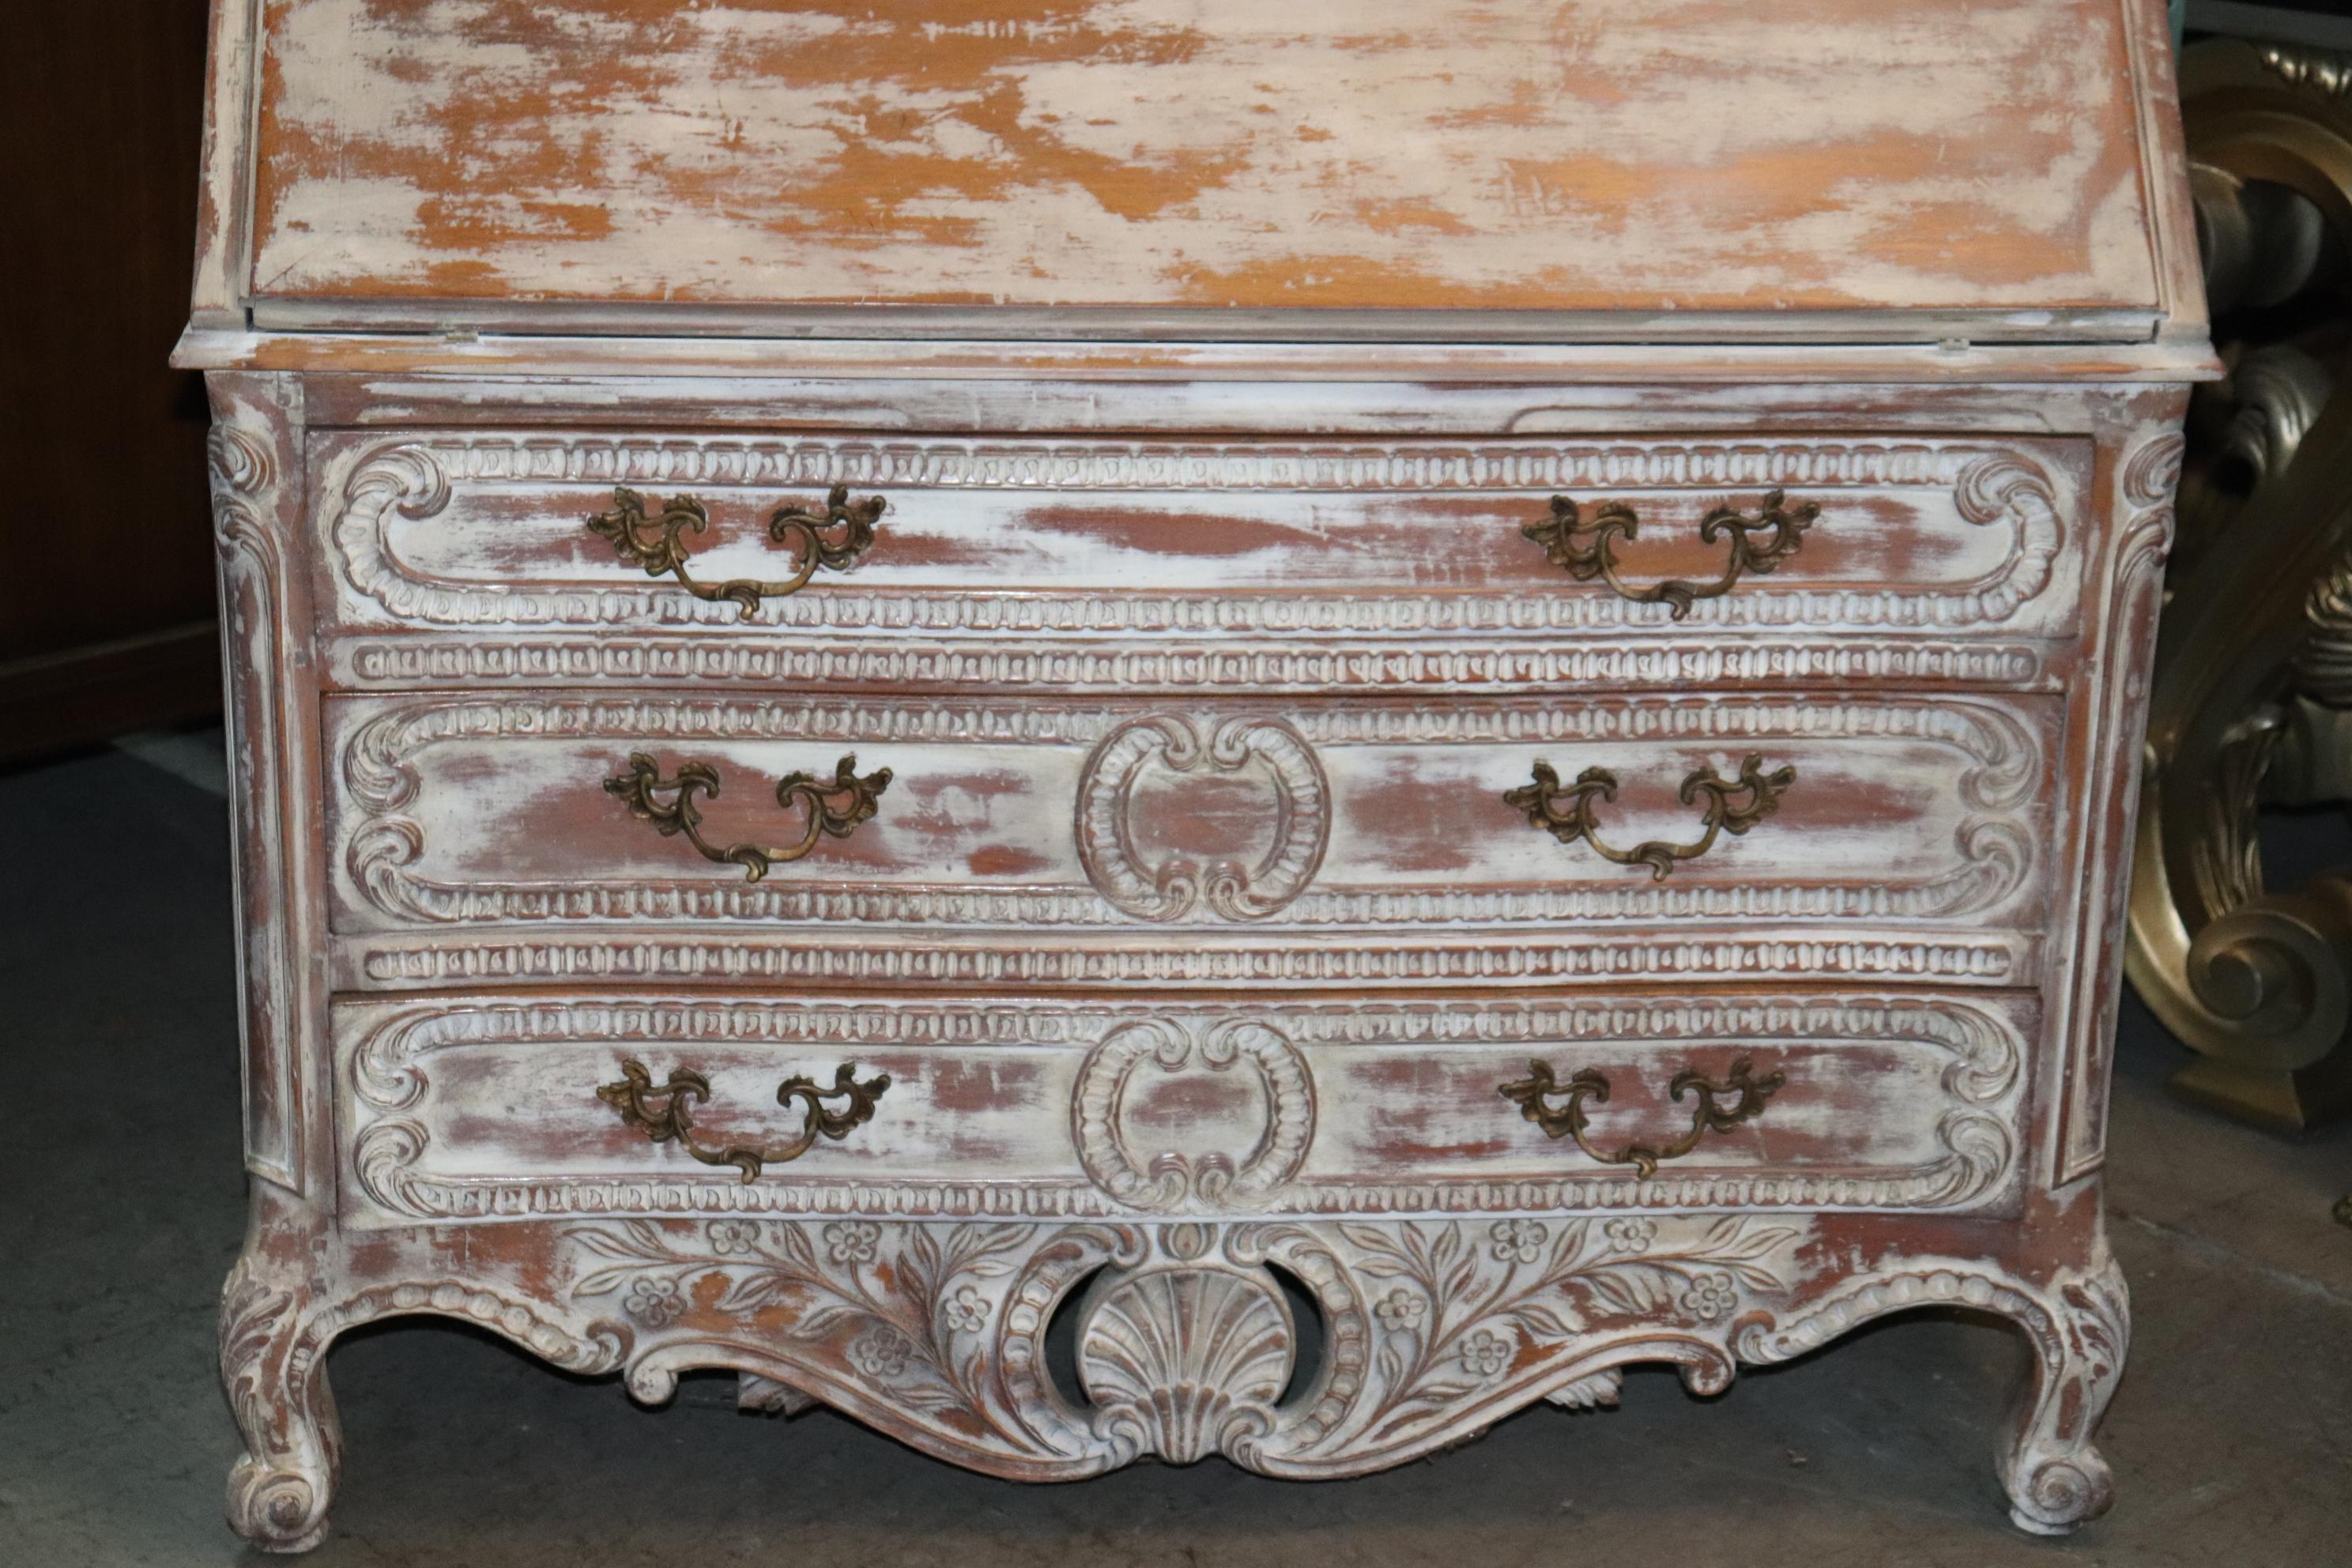 Leather Monumental Distressed White Paint Decorated French Provincial Secretary Desk